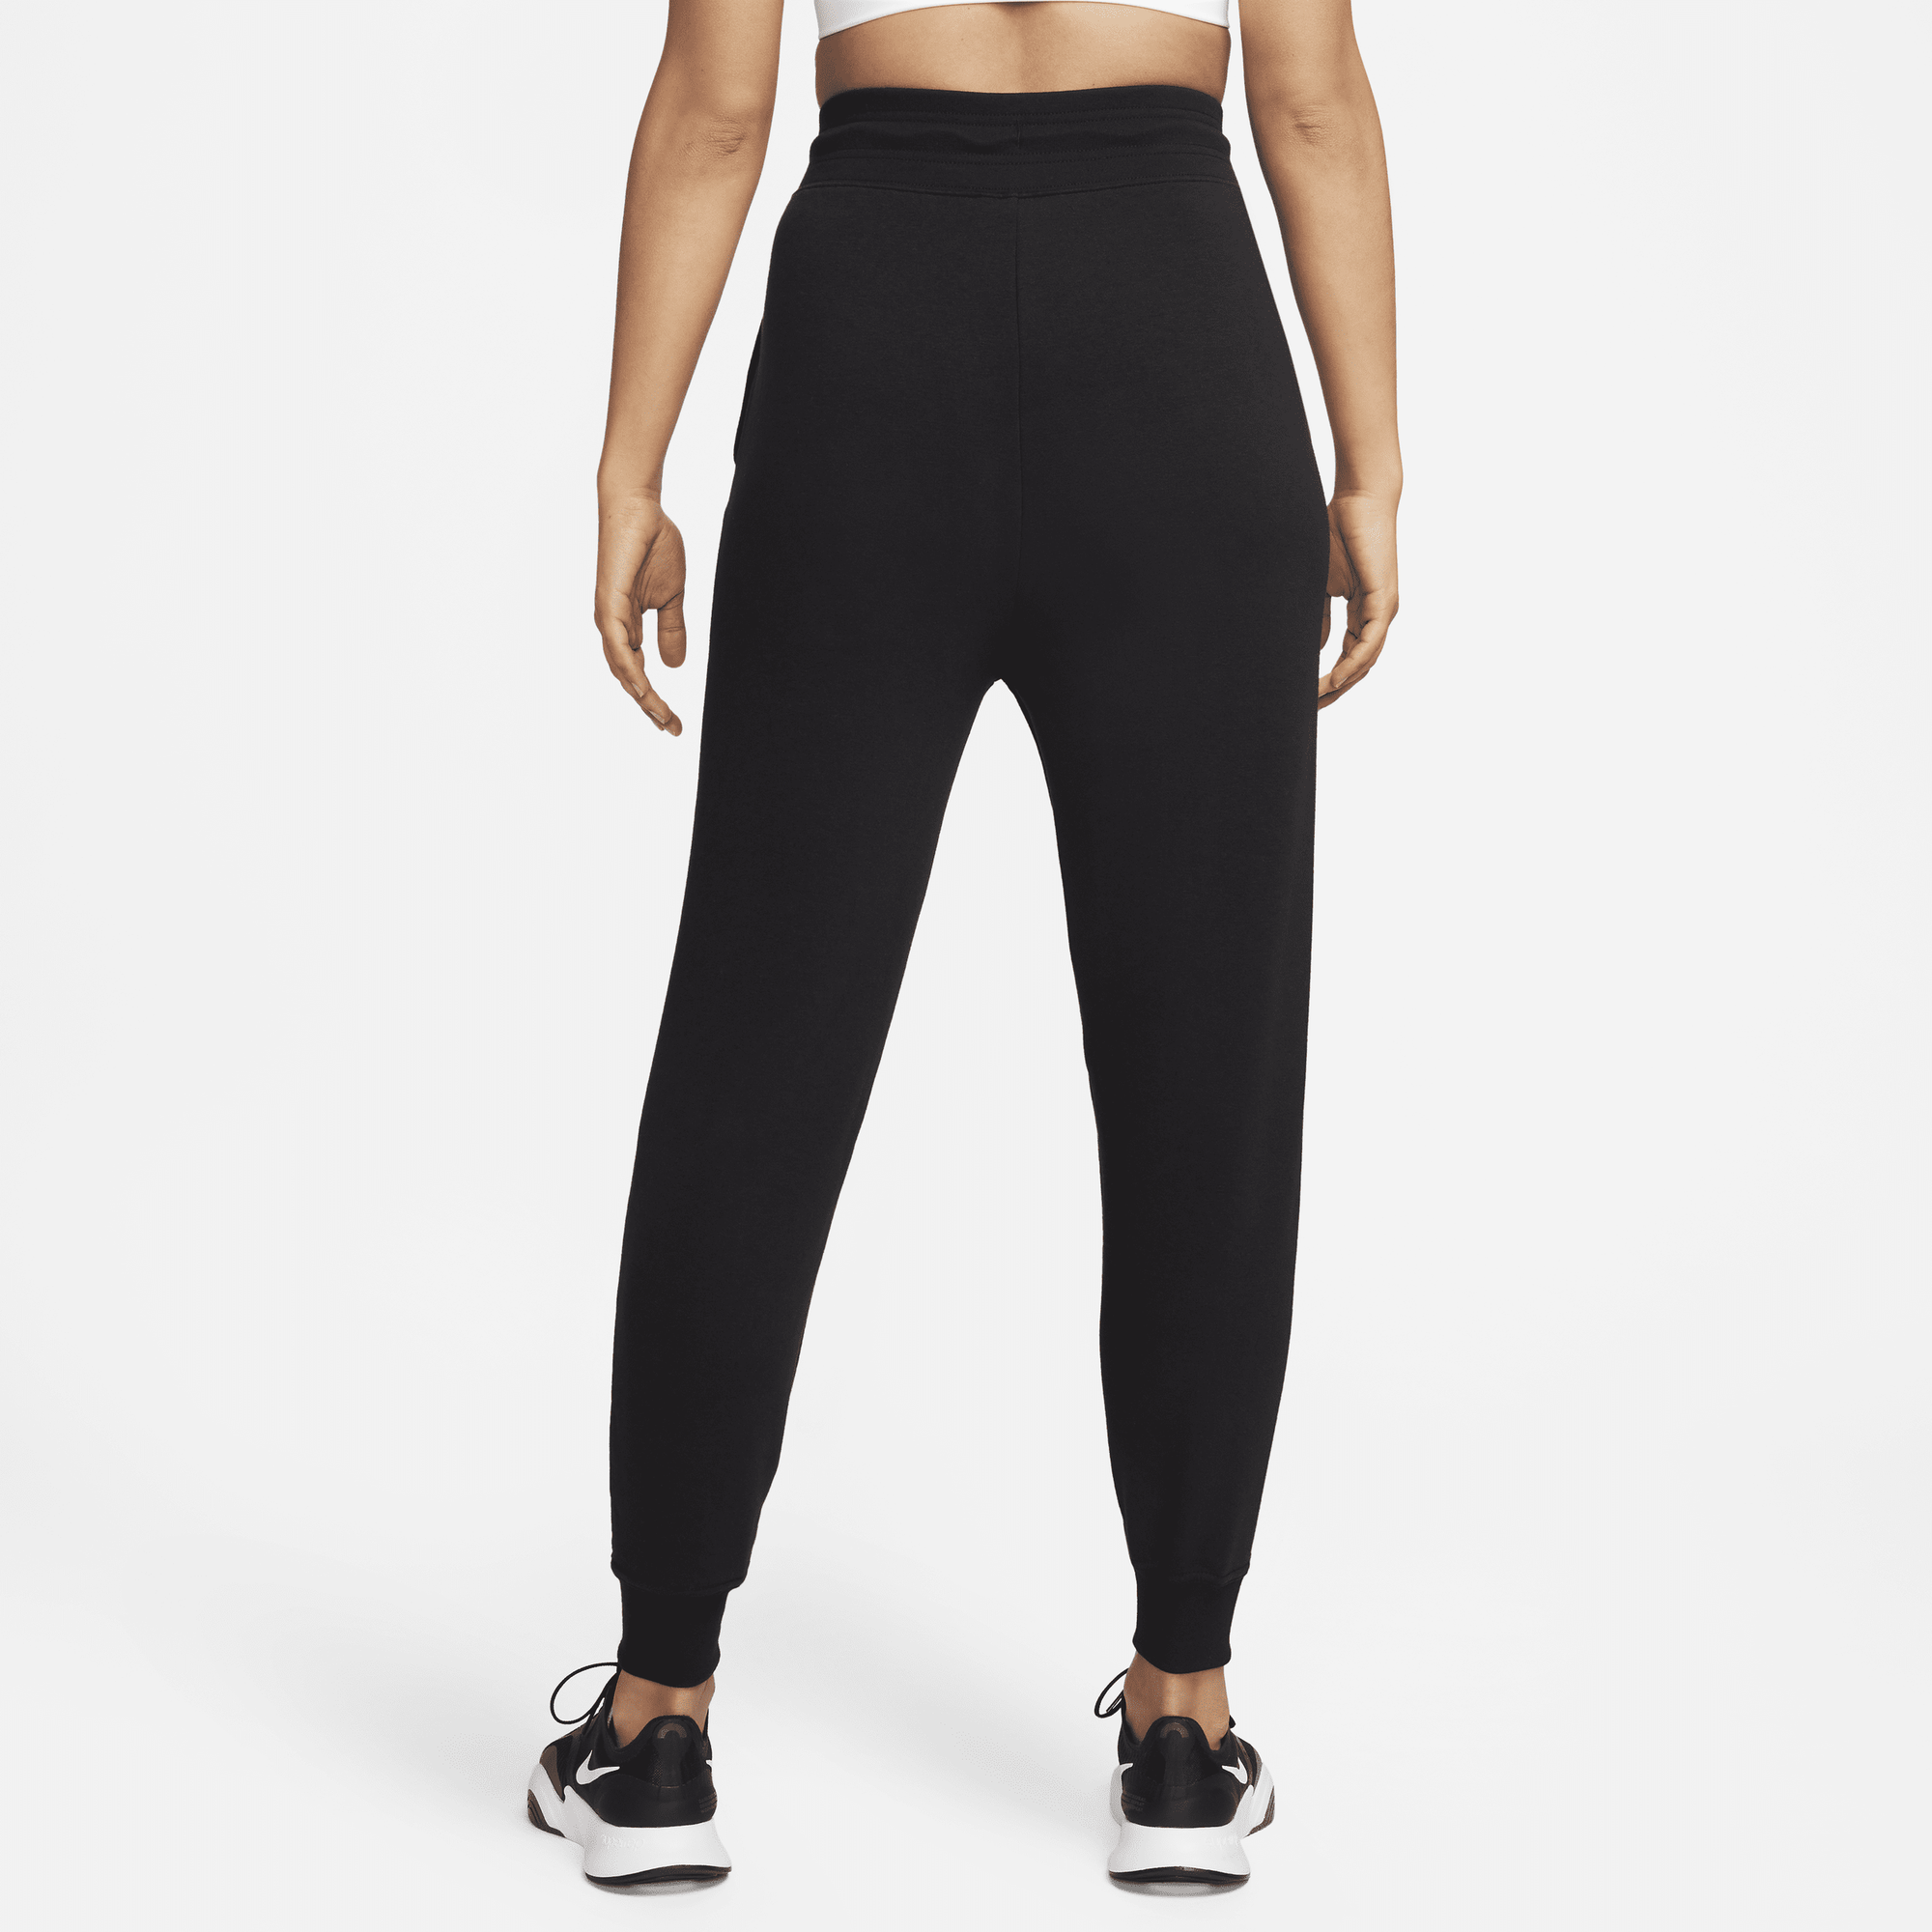 Buy Nike Womens Dri-Fit Legend Skinny Fit Training Pants-Black-Medium  Online at Low Prices in India 